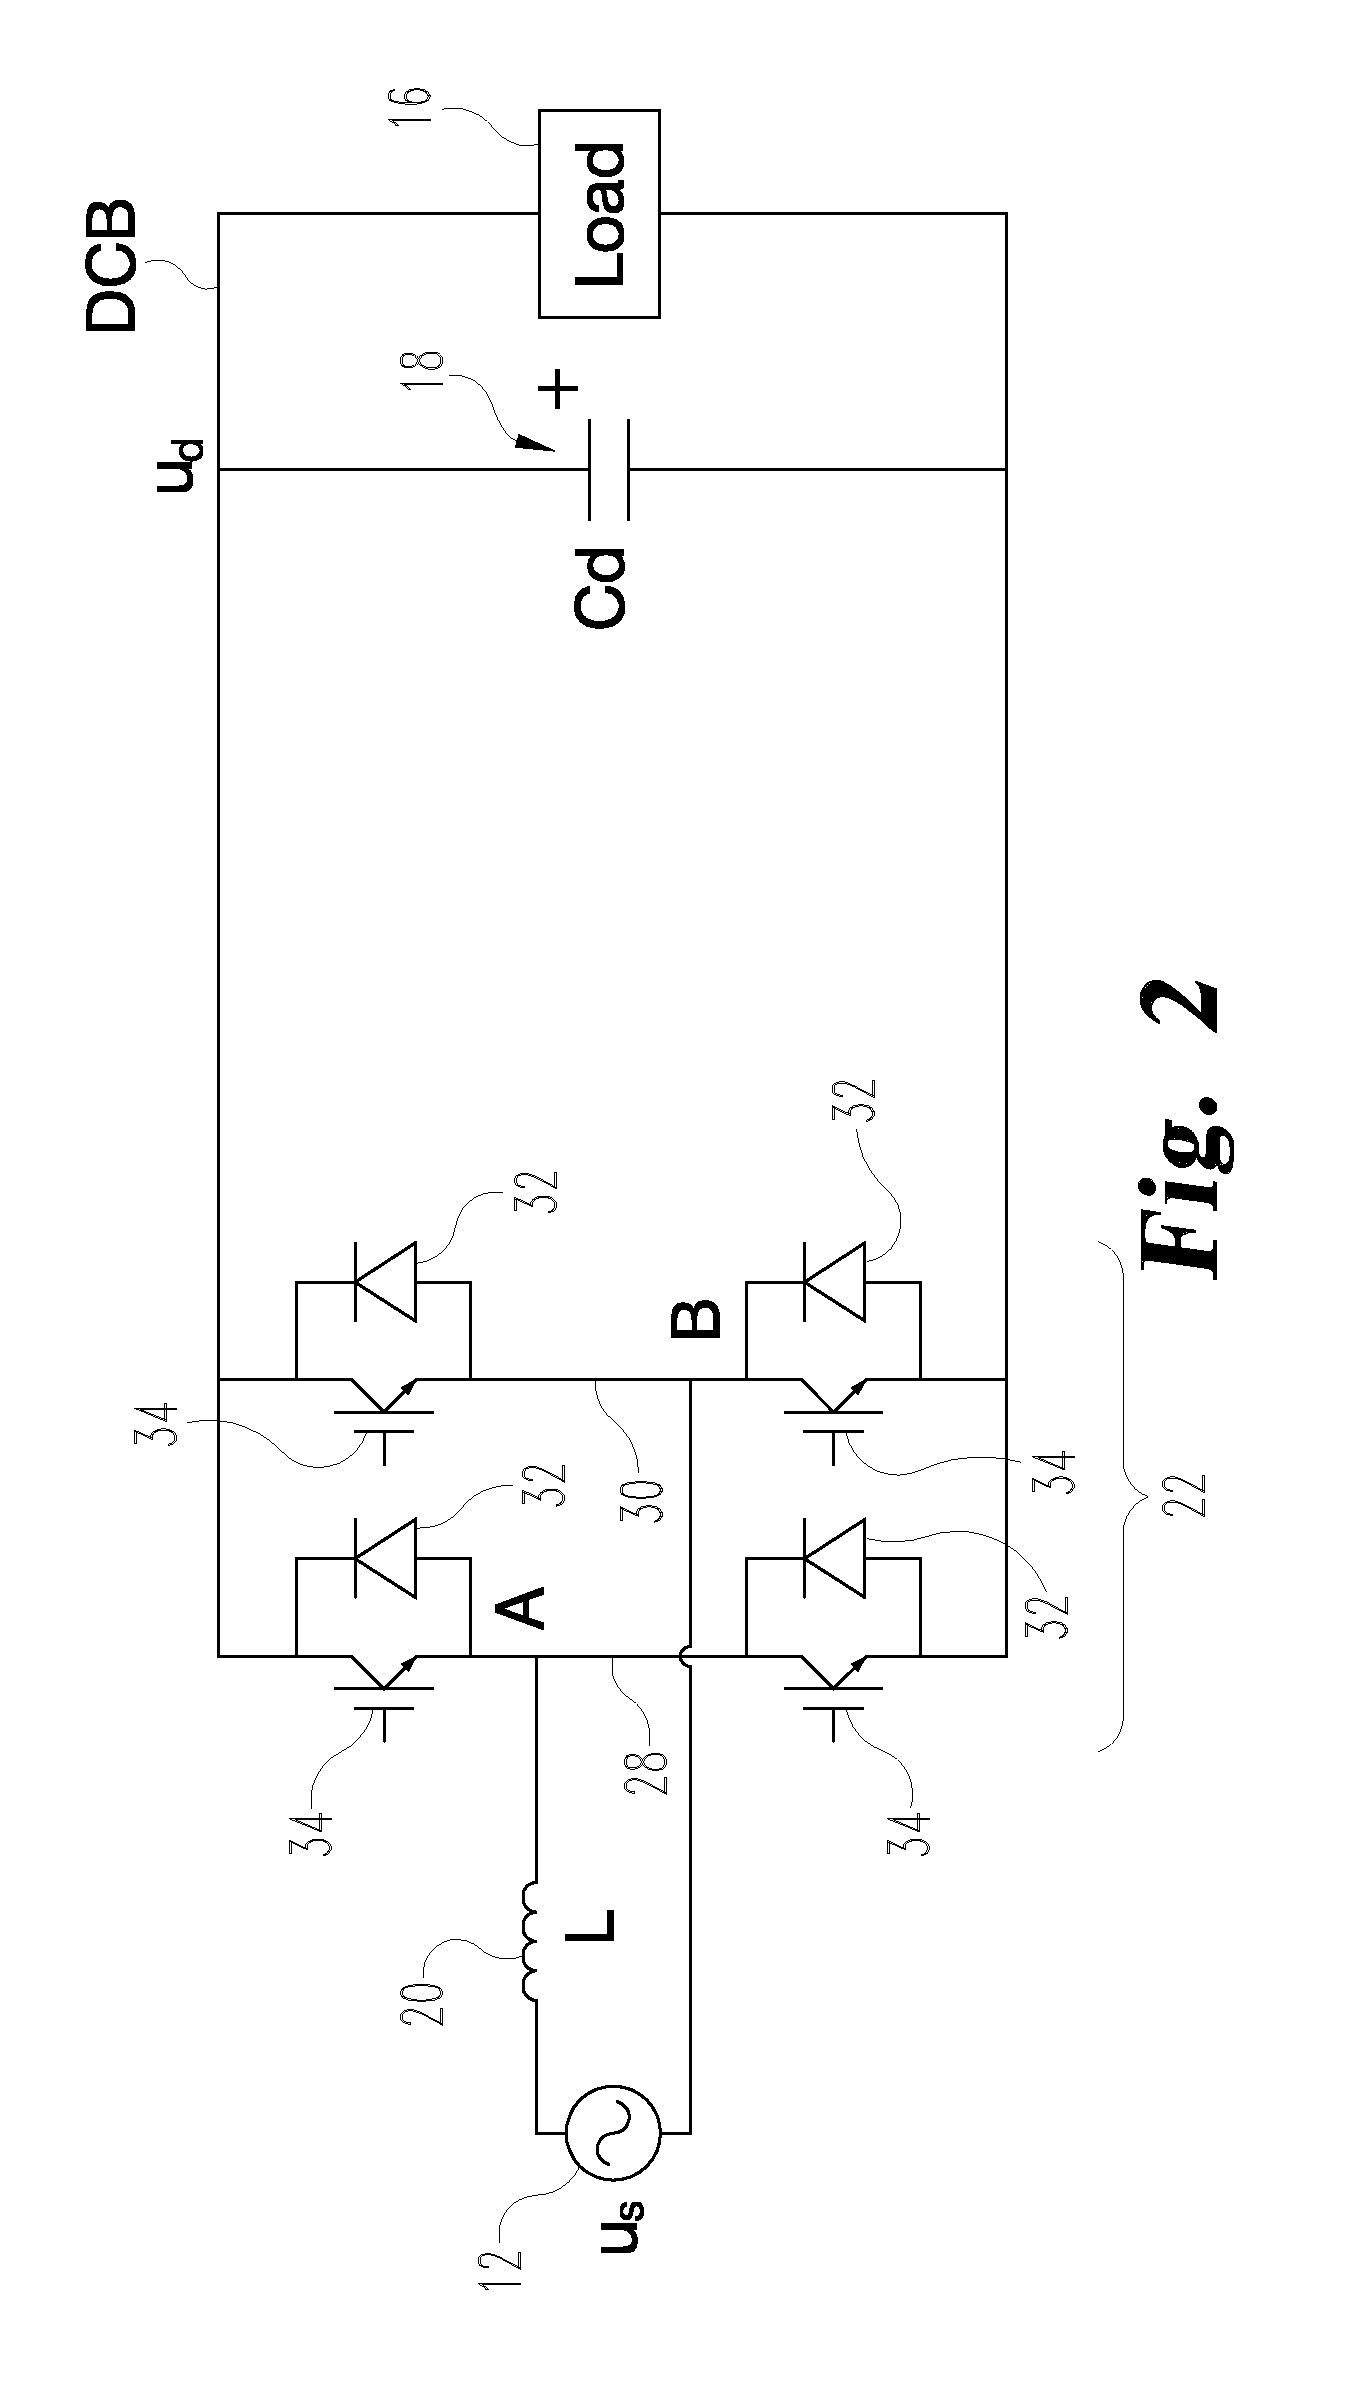 Electrical power system with high-density pulse width modulated (PWM) rectifier